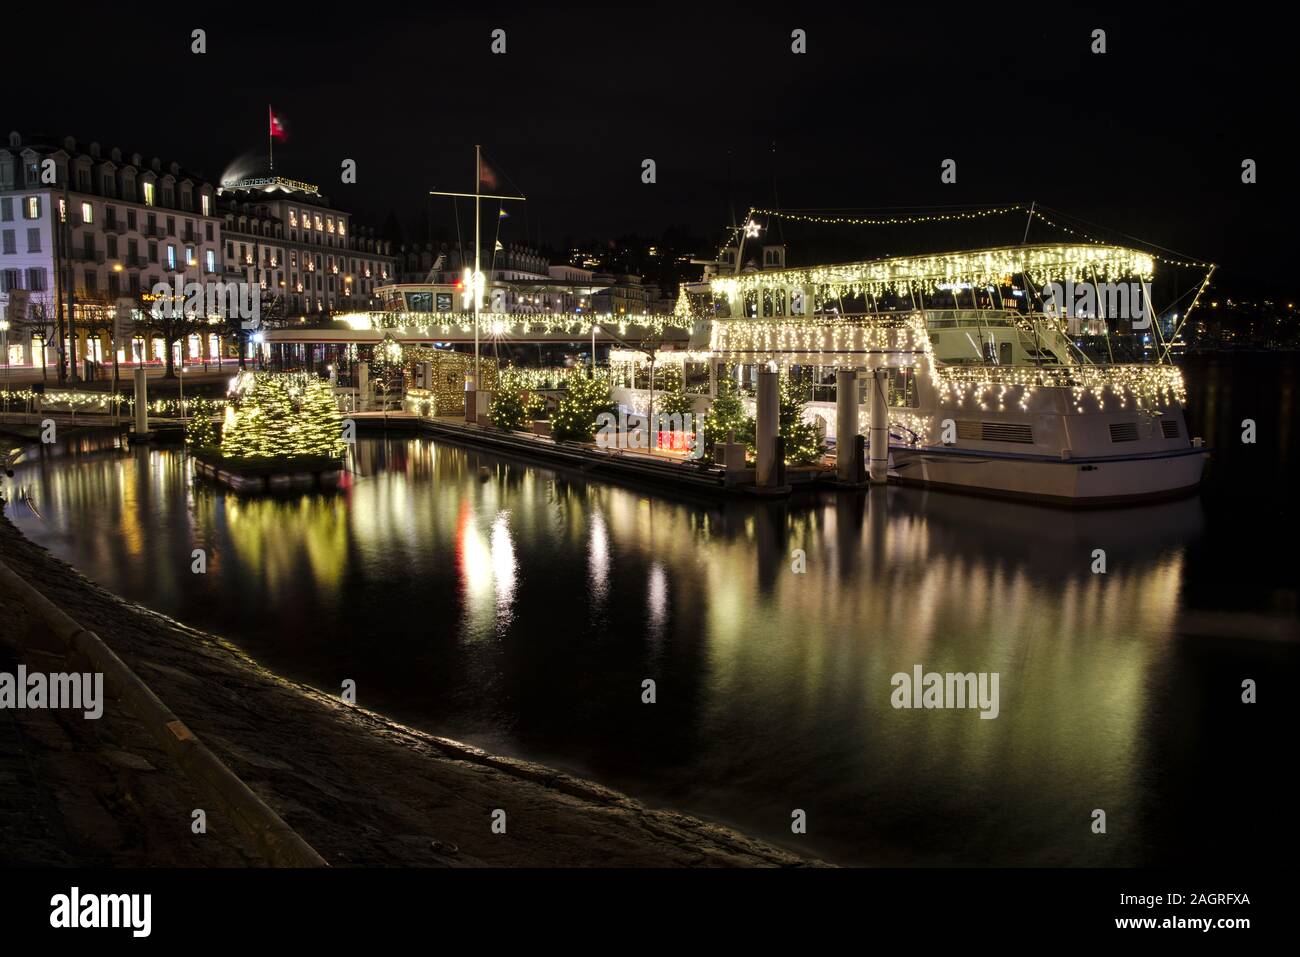 Boat decorated with Christmas lights in front of the Schwanenplatz in Lucerne, Switzerland, during night Stock Photo